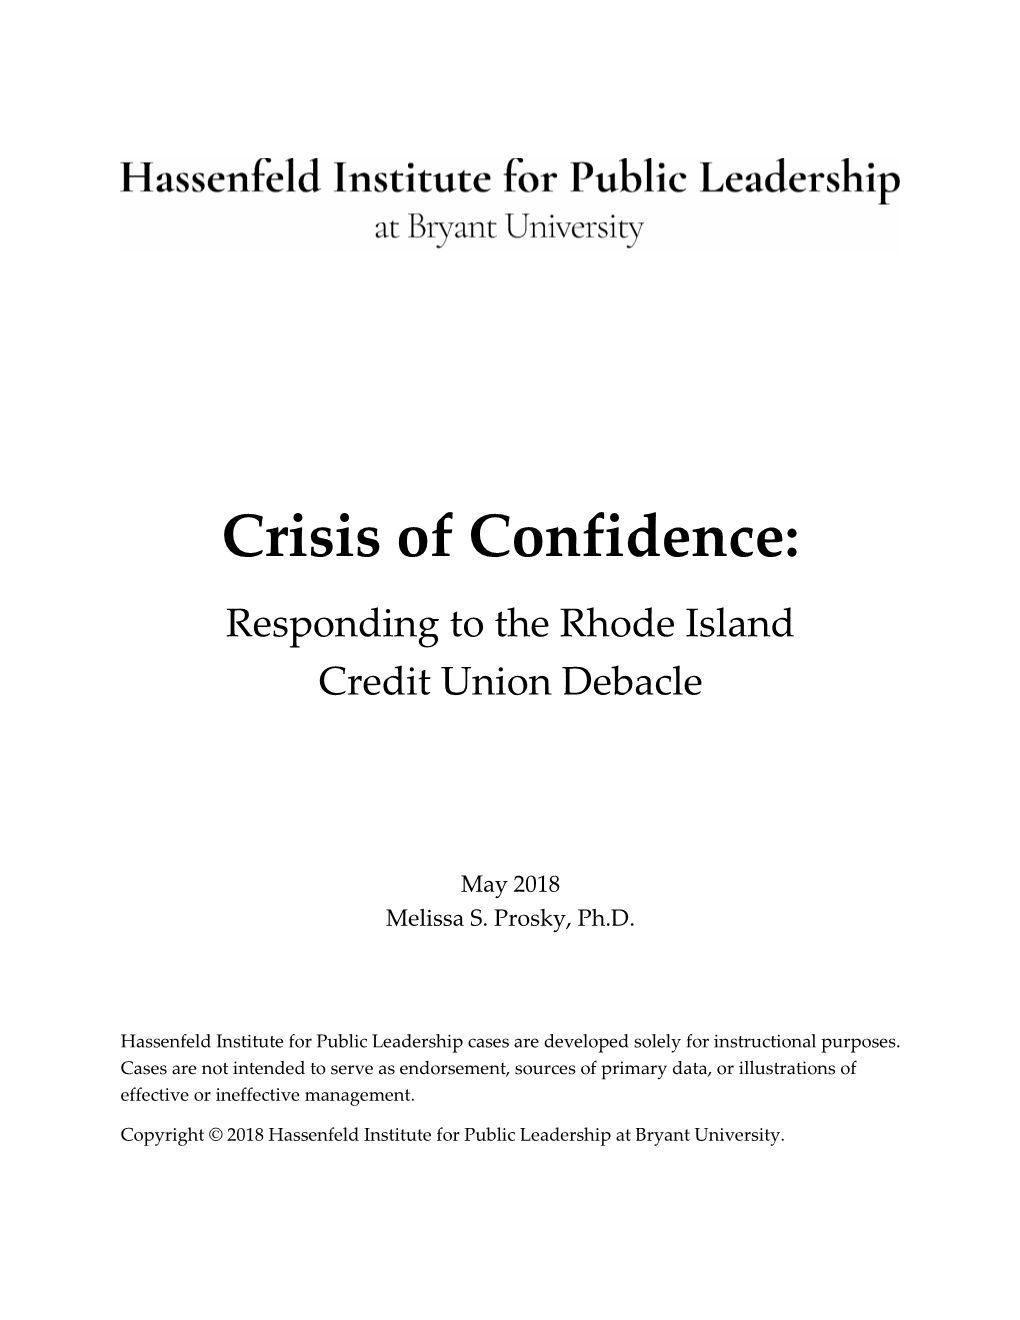 Crisis of Confidence: Responding to the Rhode Island Credit Union Debacle